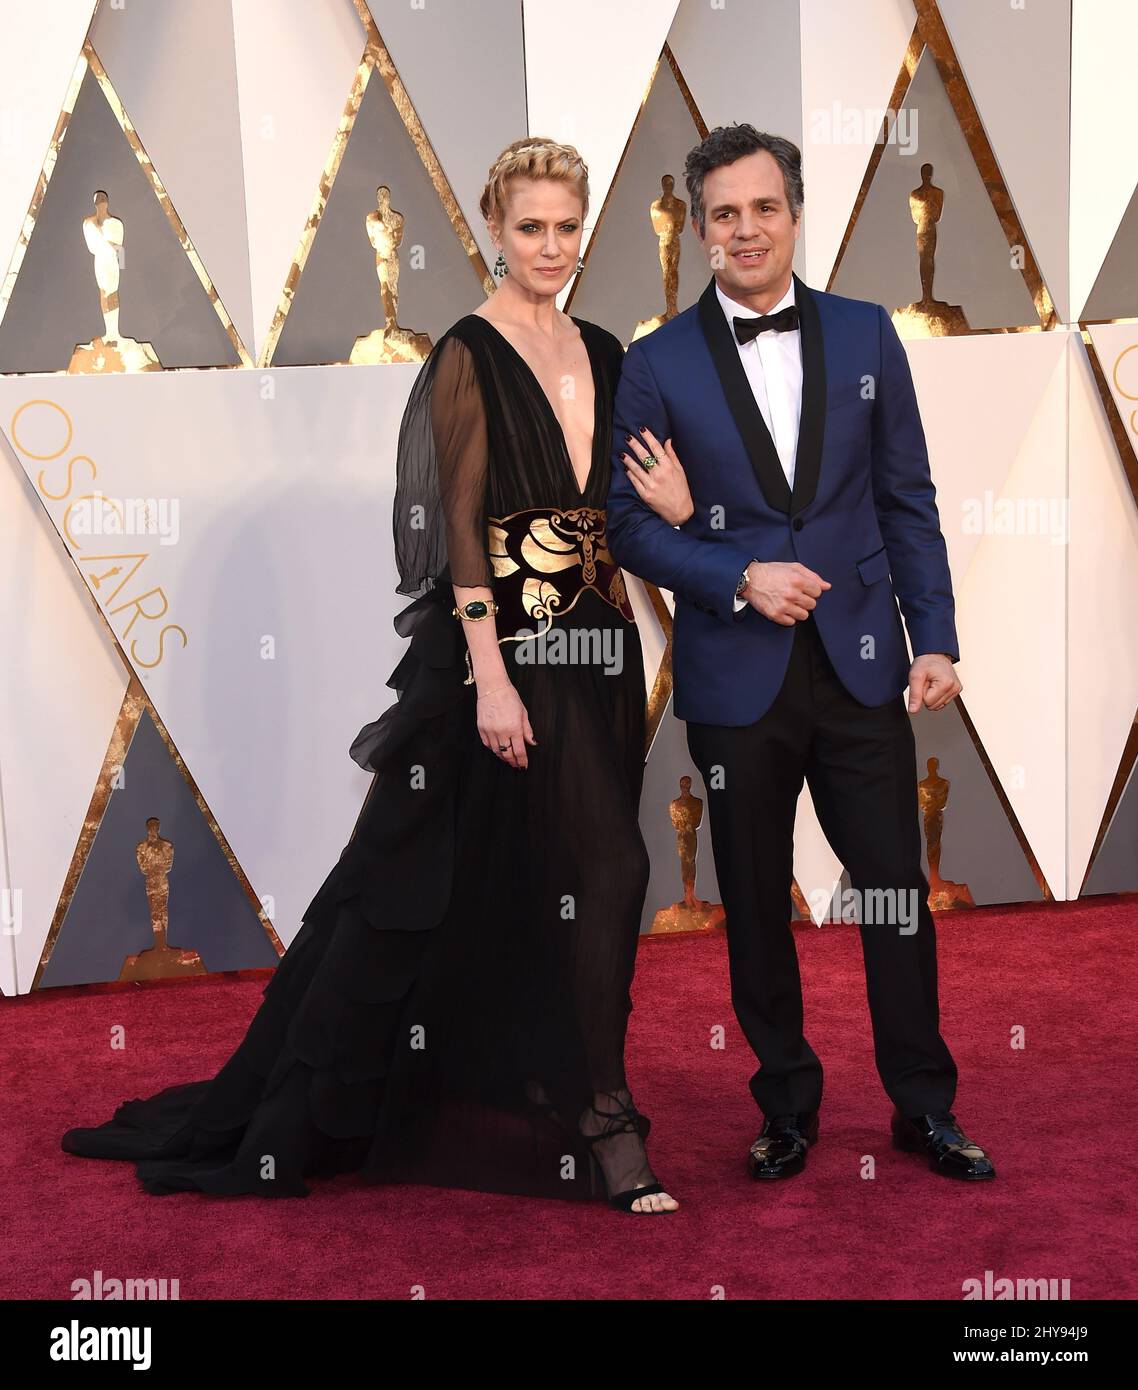 Mark Ruffalo and Sunrise Coigney attending the 88th Annual Academy Awards held at the Dolby Theatre Stock Photo